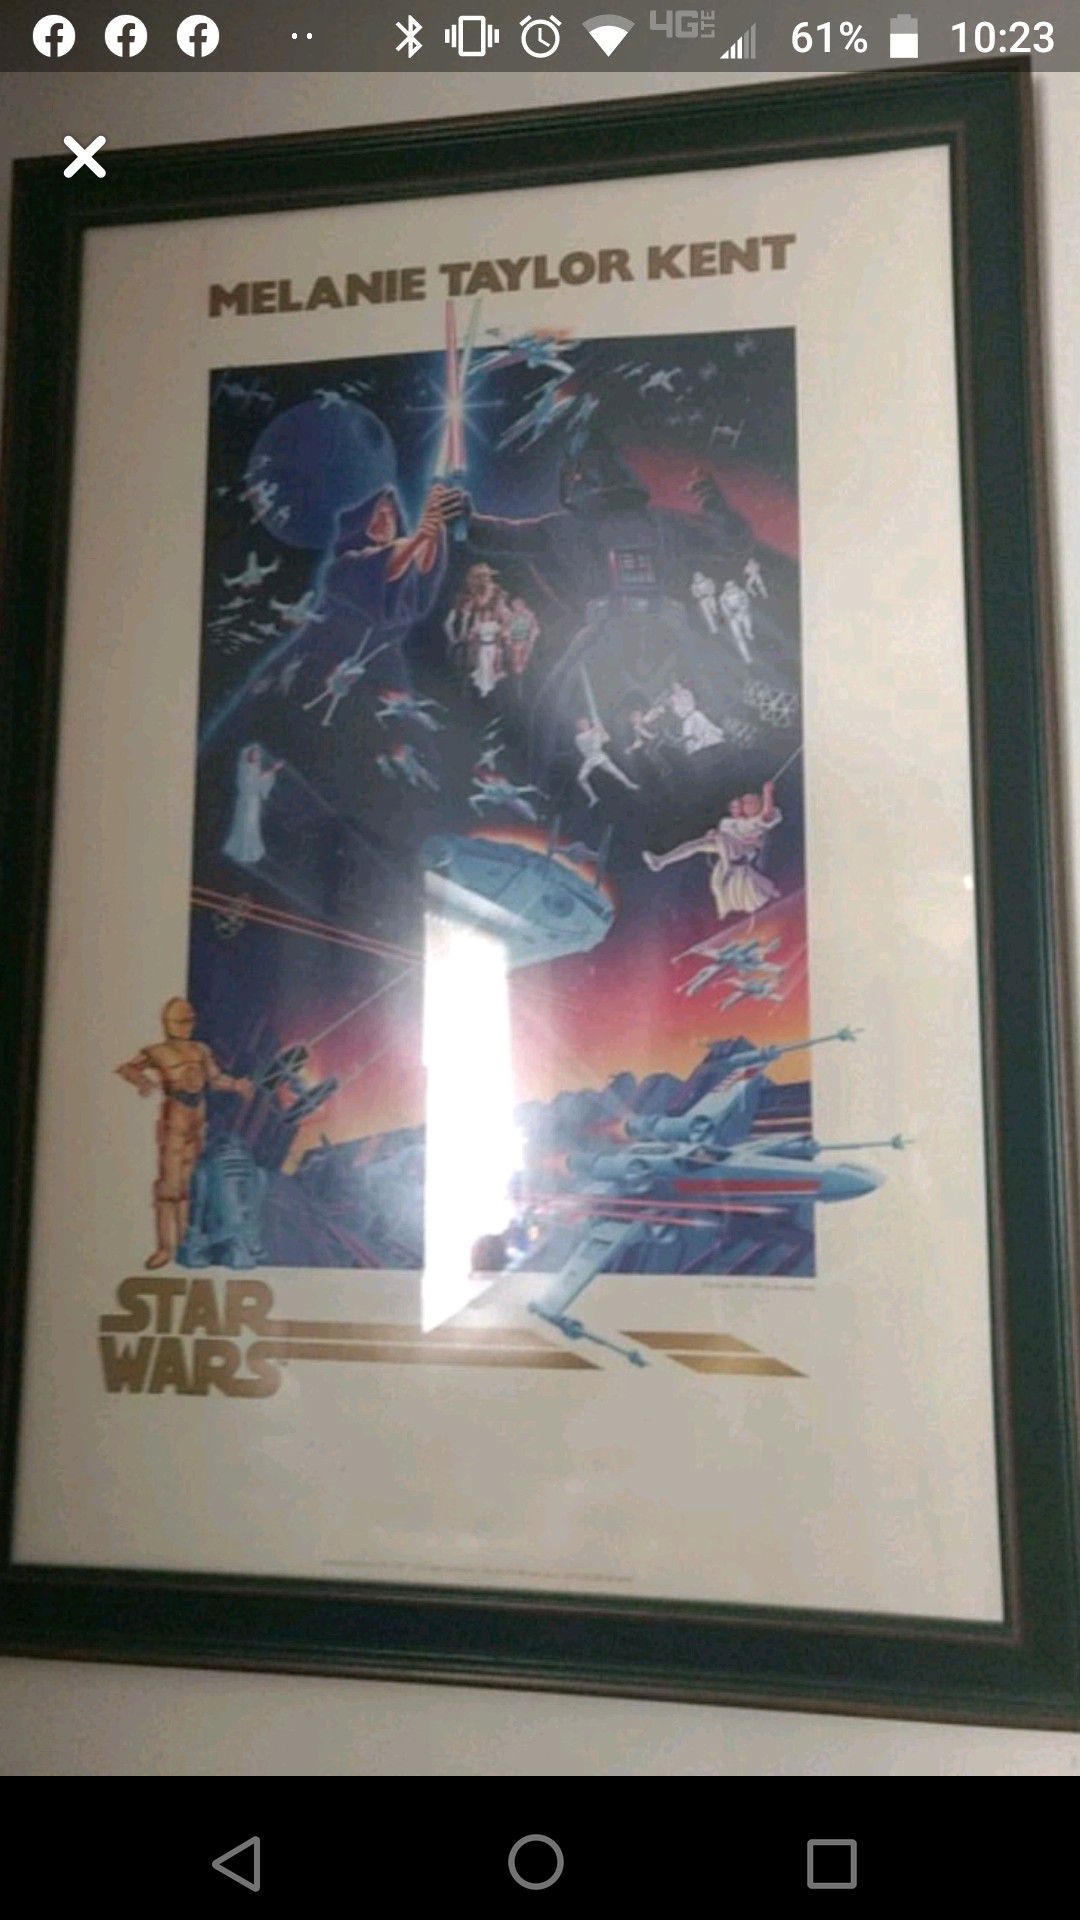 Taylor Kent Star Wars poster (price can be lowered)